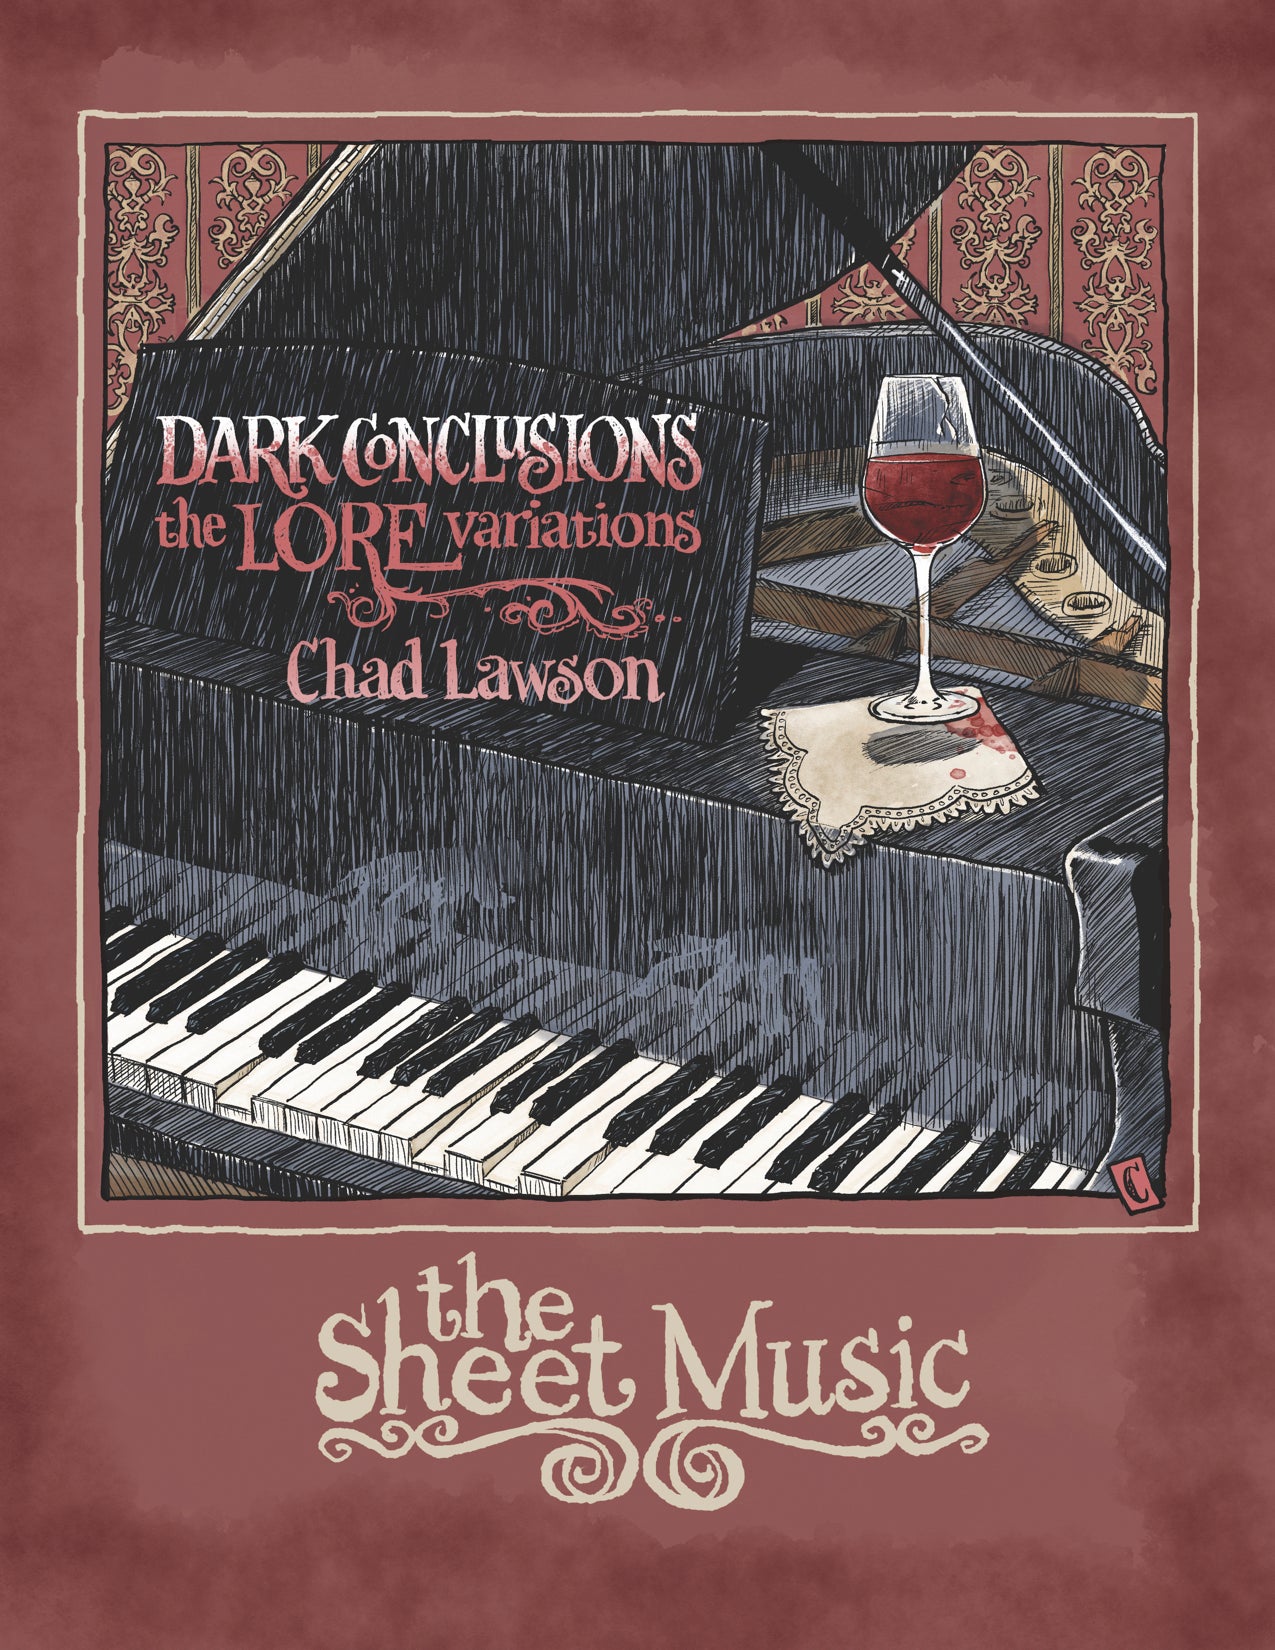 Dark Conclusions - The Lore Variations (Songbook & Sheet Music)